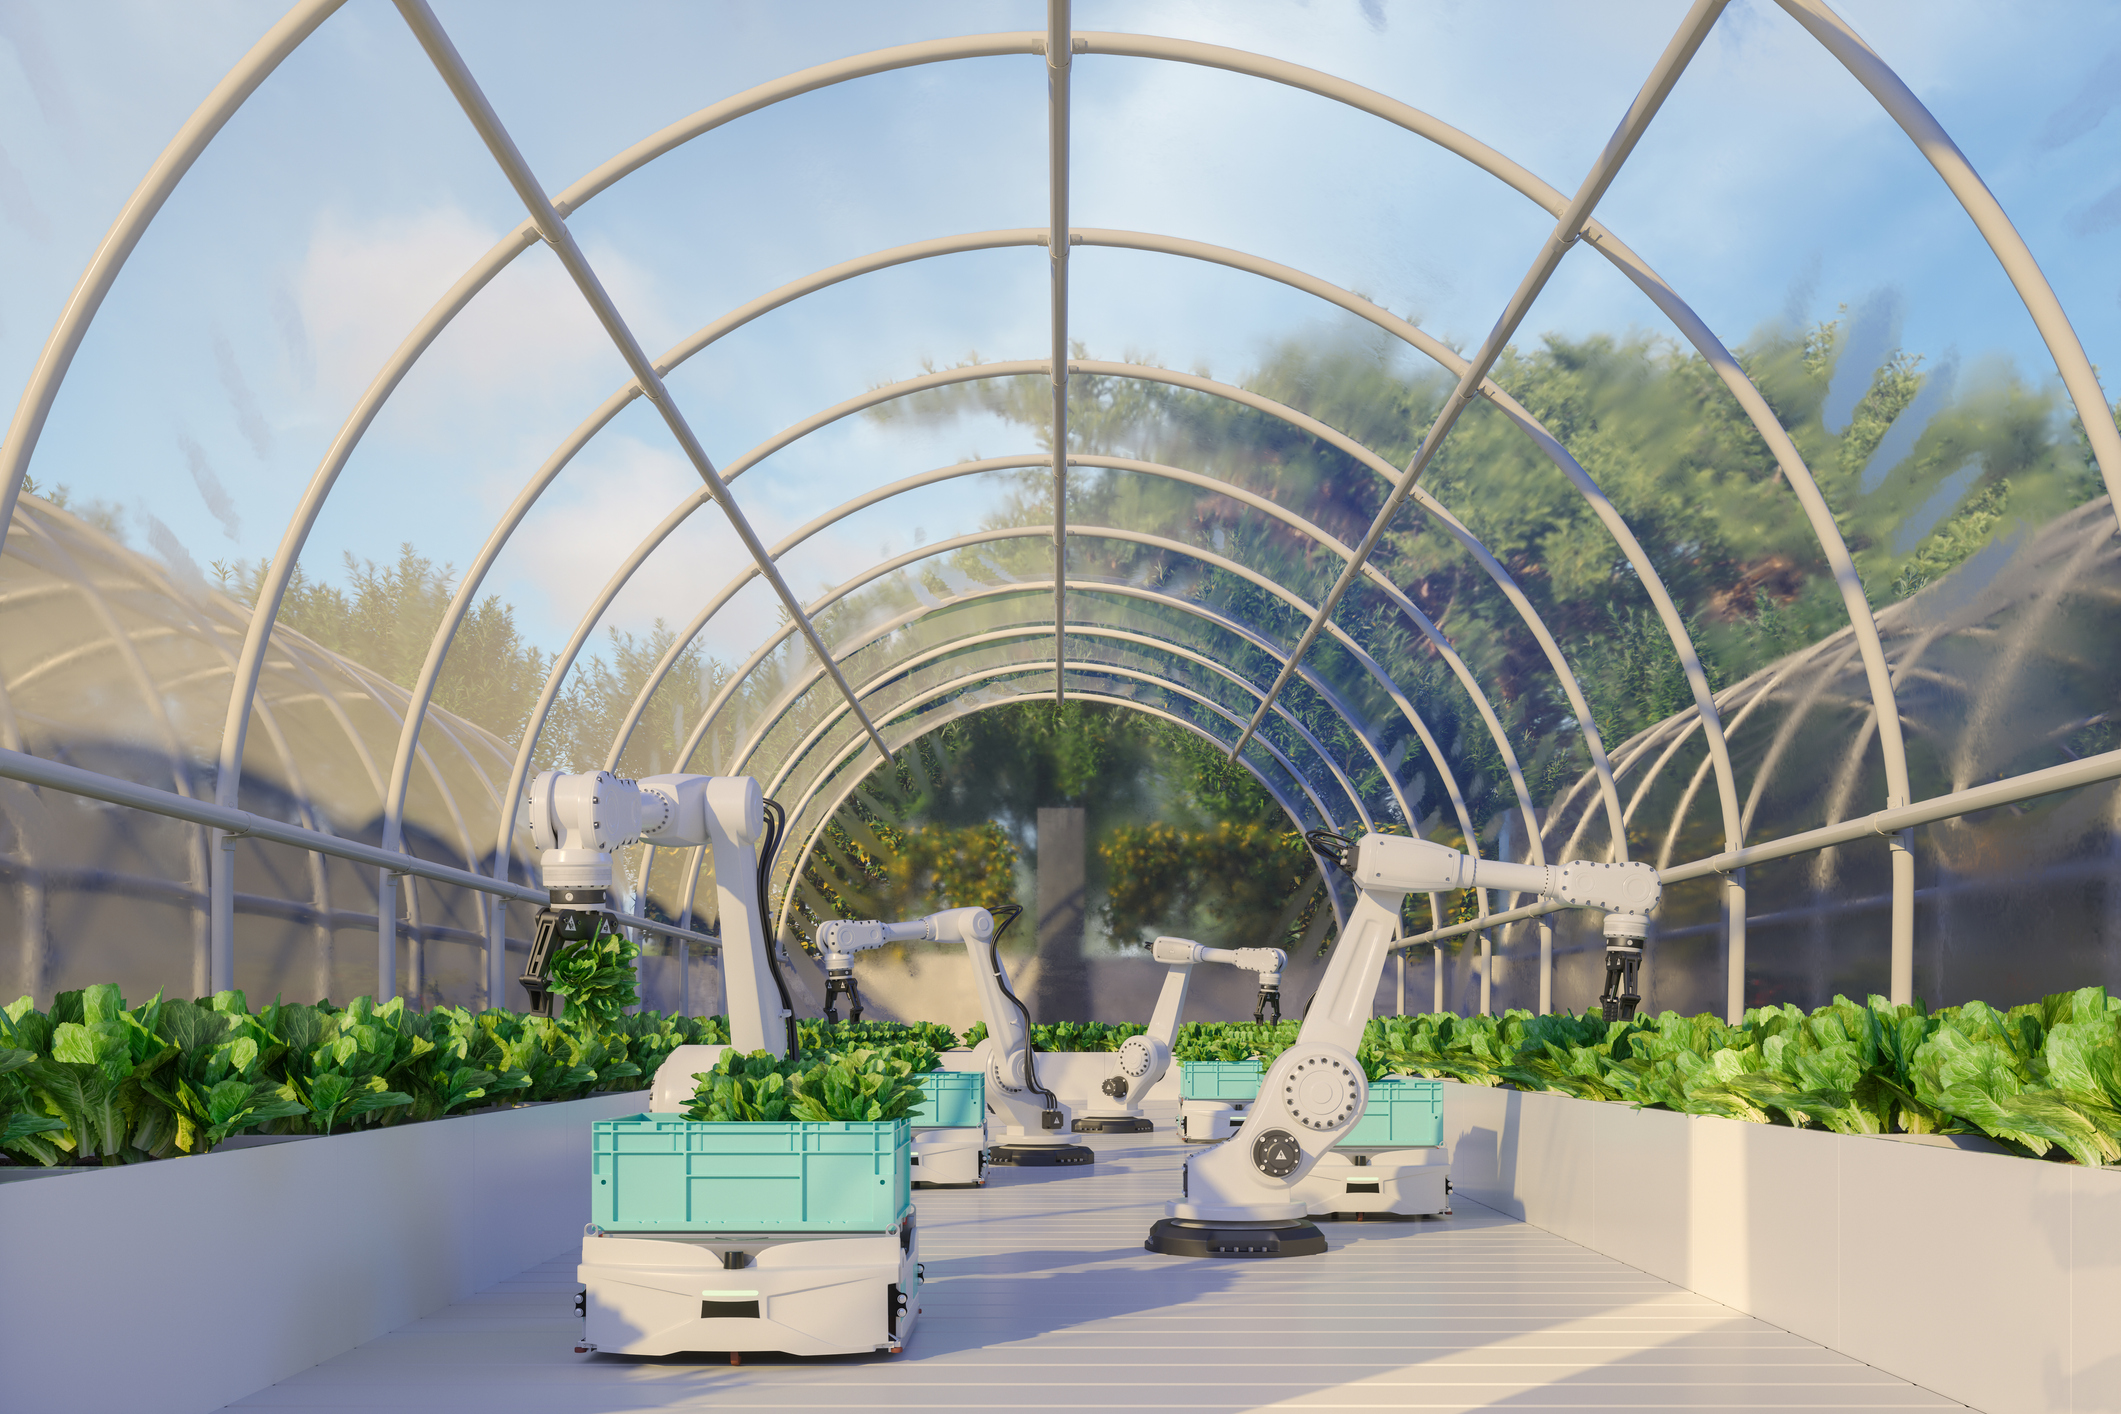 Smart Farming Technology With Robotic Arms Harvesting Vegetables In Automated Greenhouse. Credit: Credit:	onurdongel/Getty Images